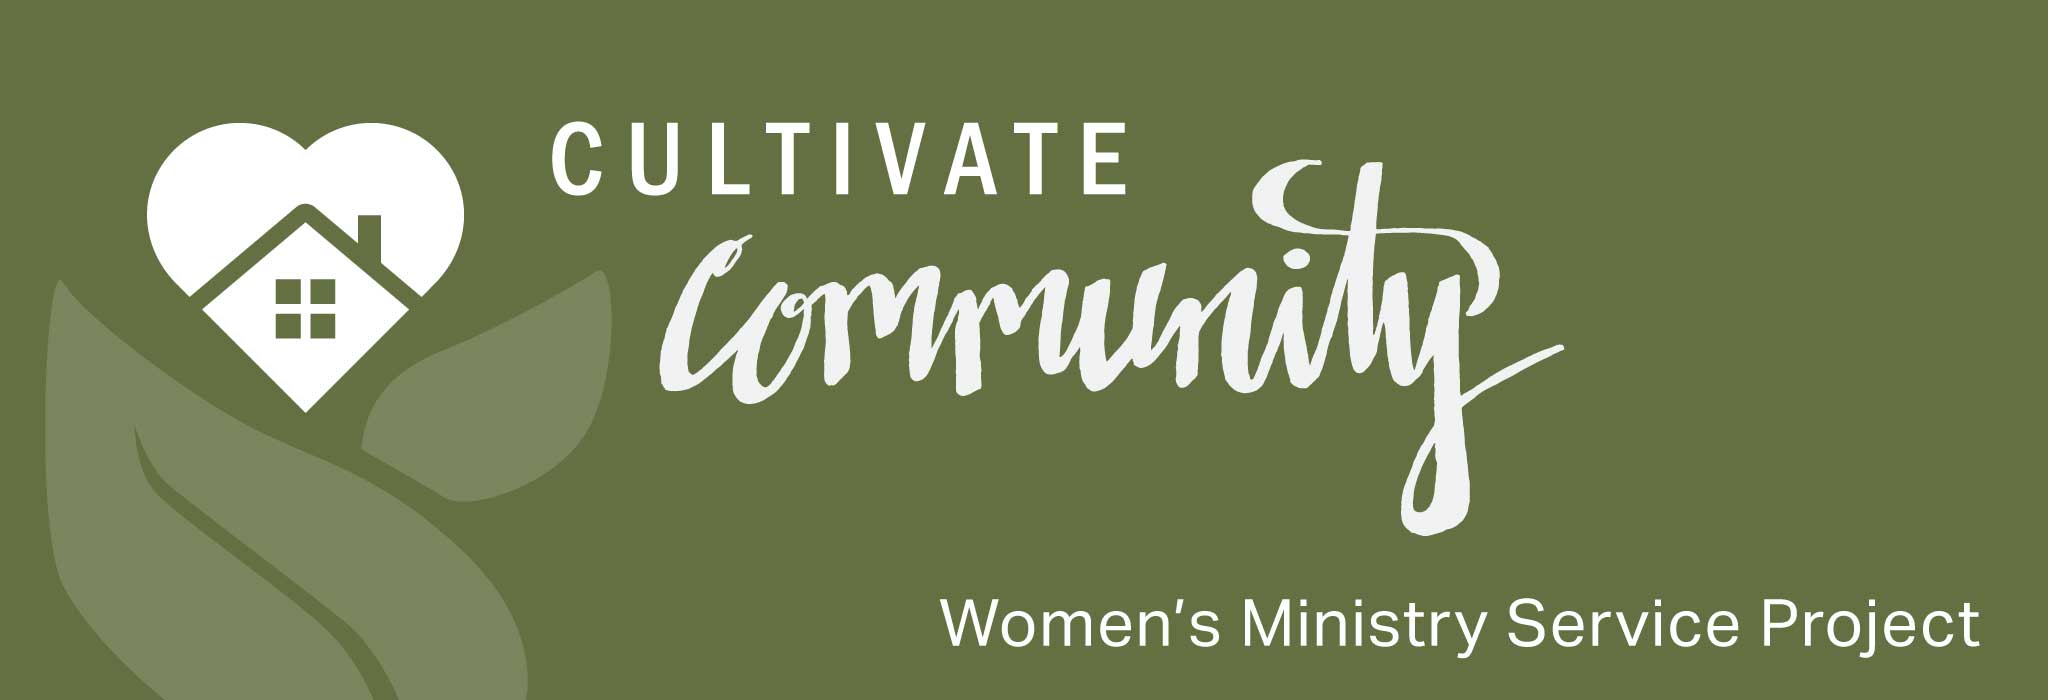 Cultivate Community: Women's Ministry Service Project